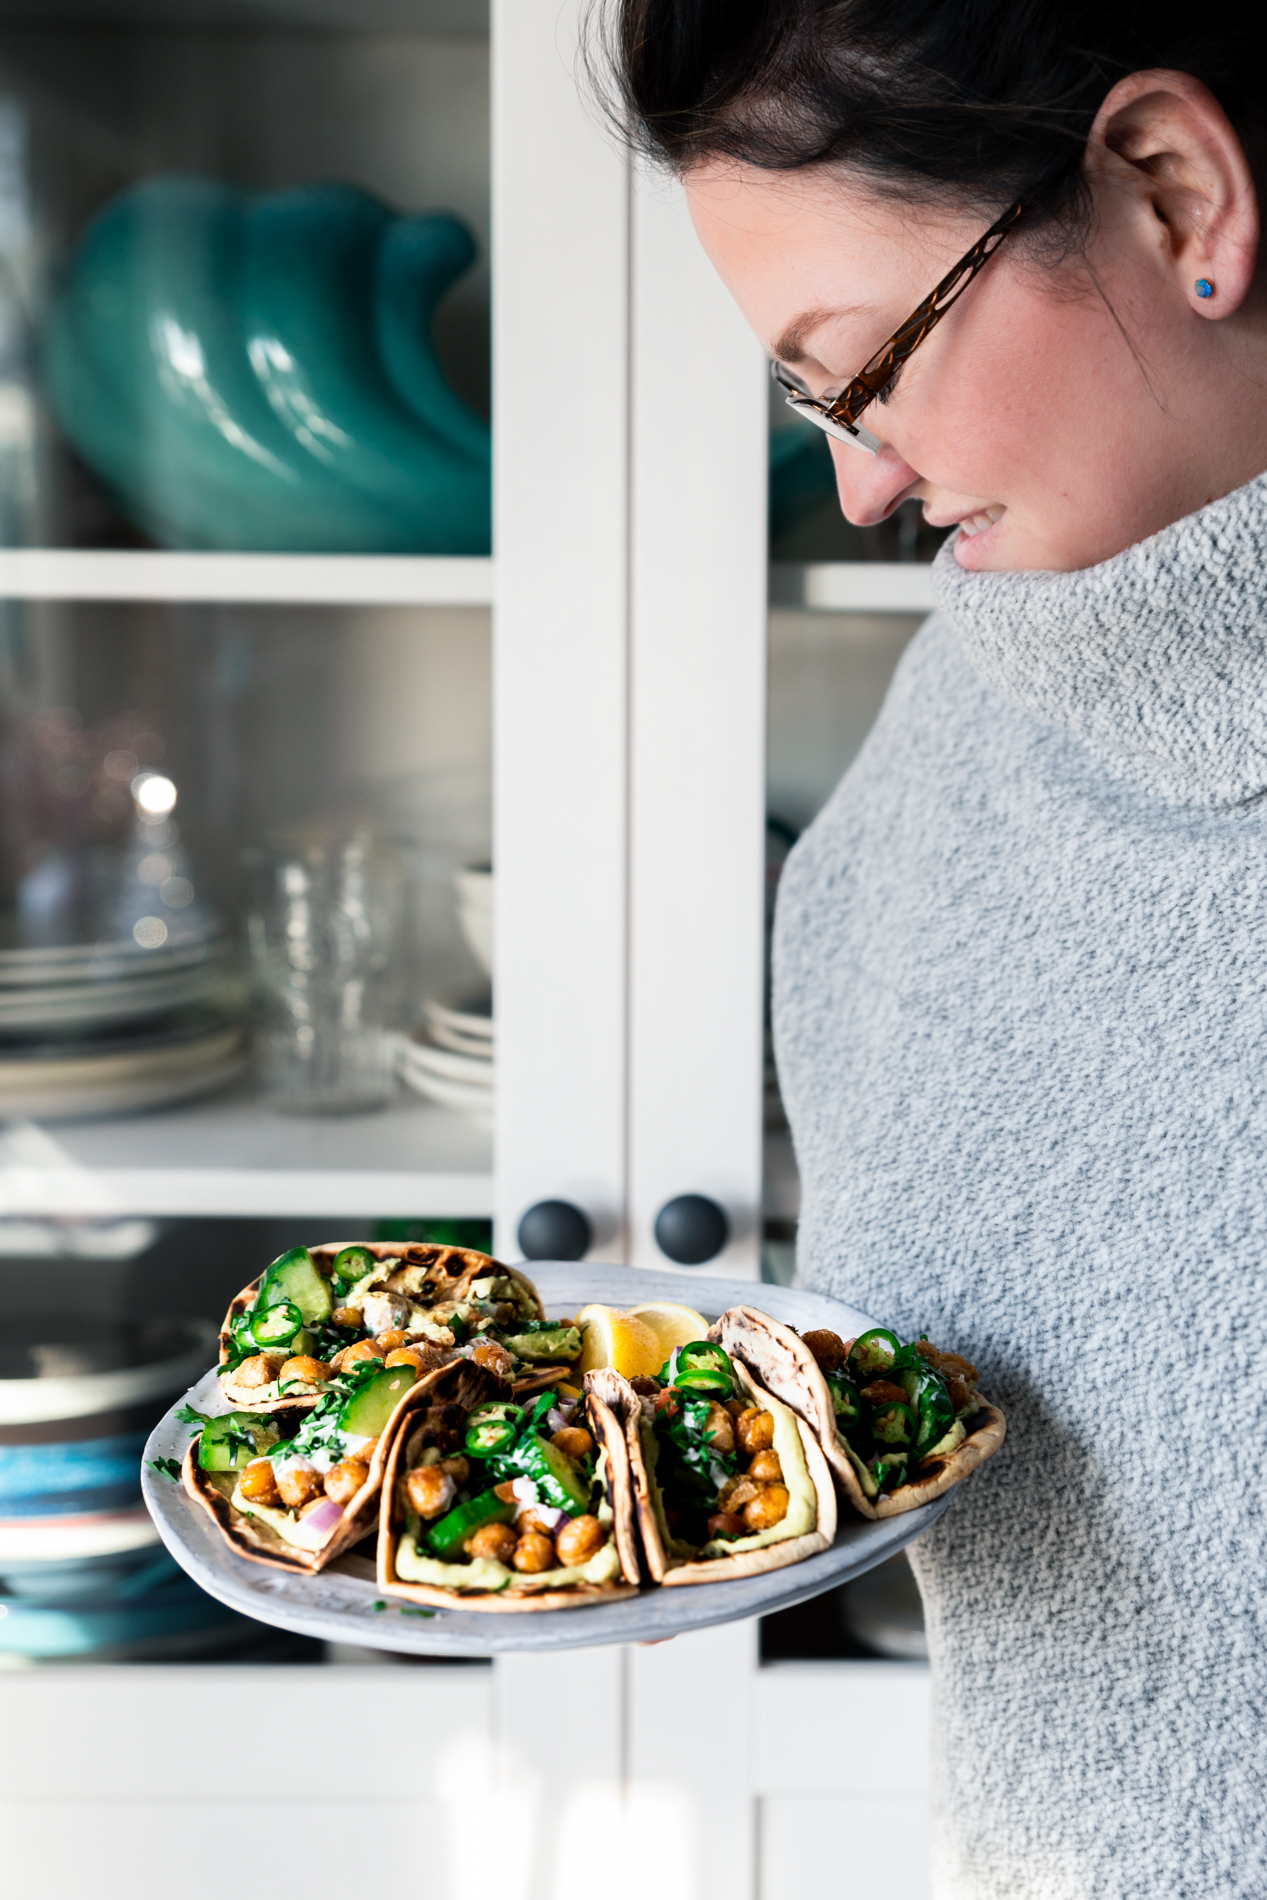 straight forward view of a woman holding a plate of deconstructed falafel pita tacos.